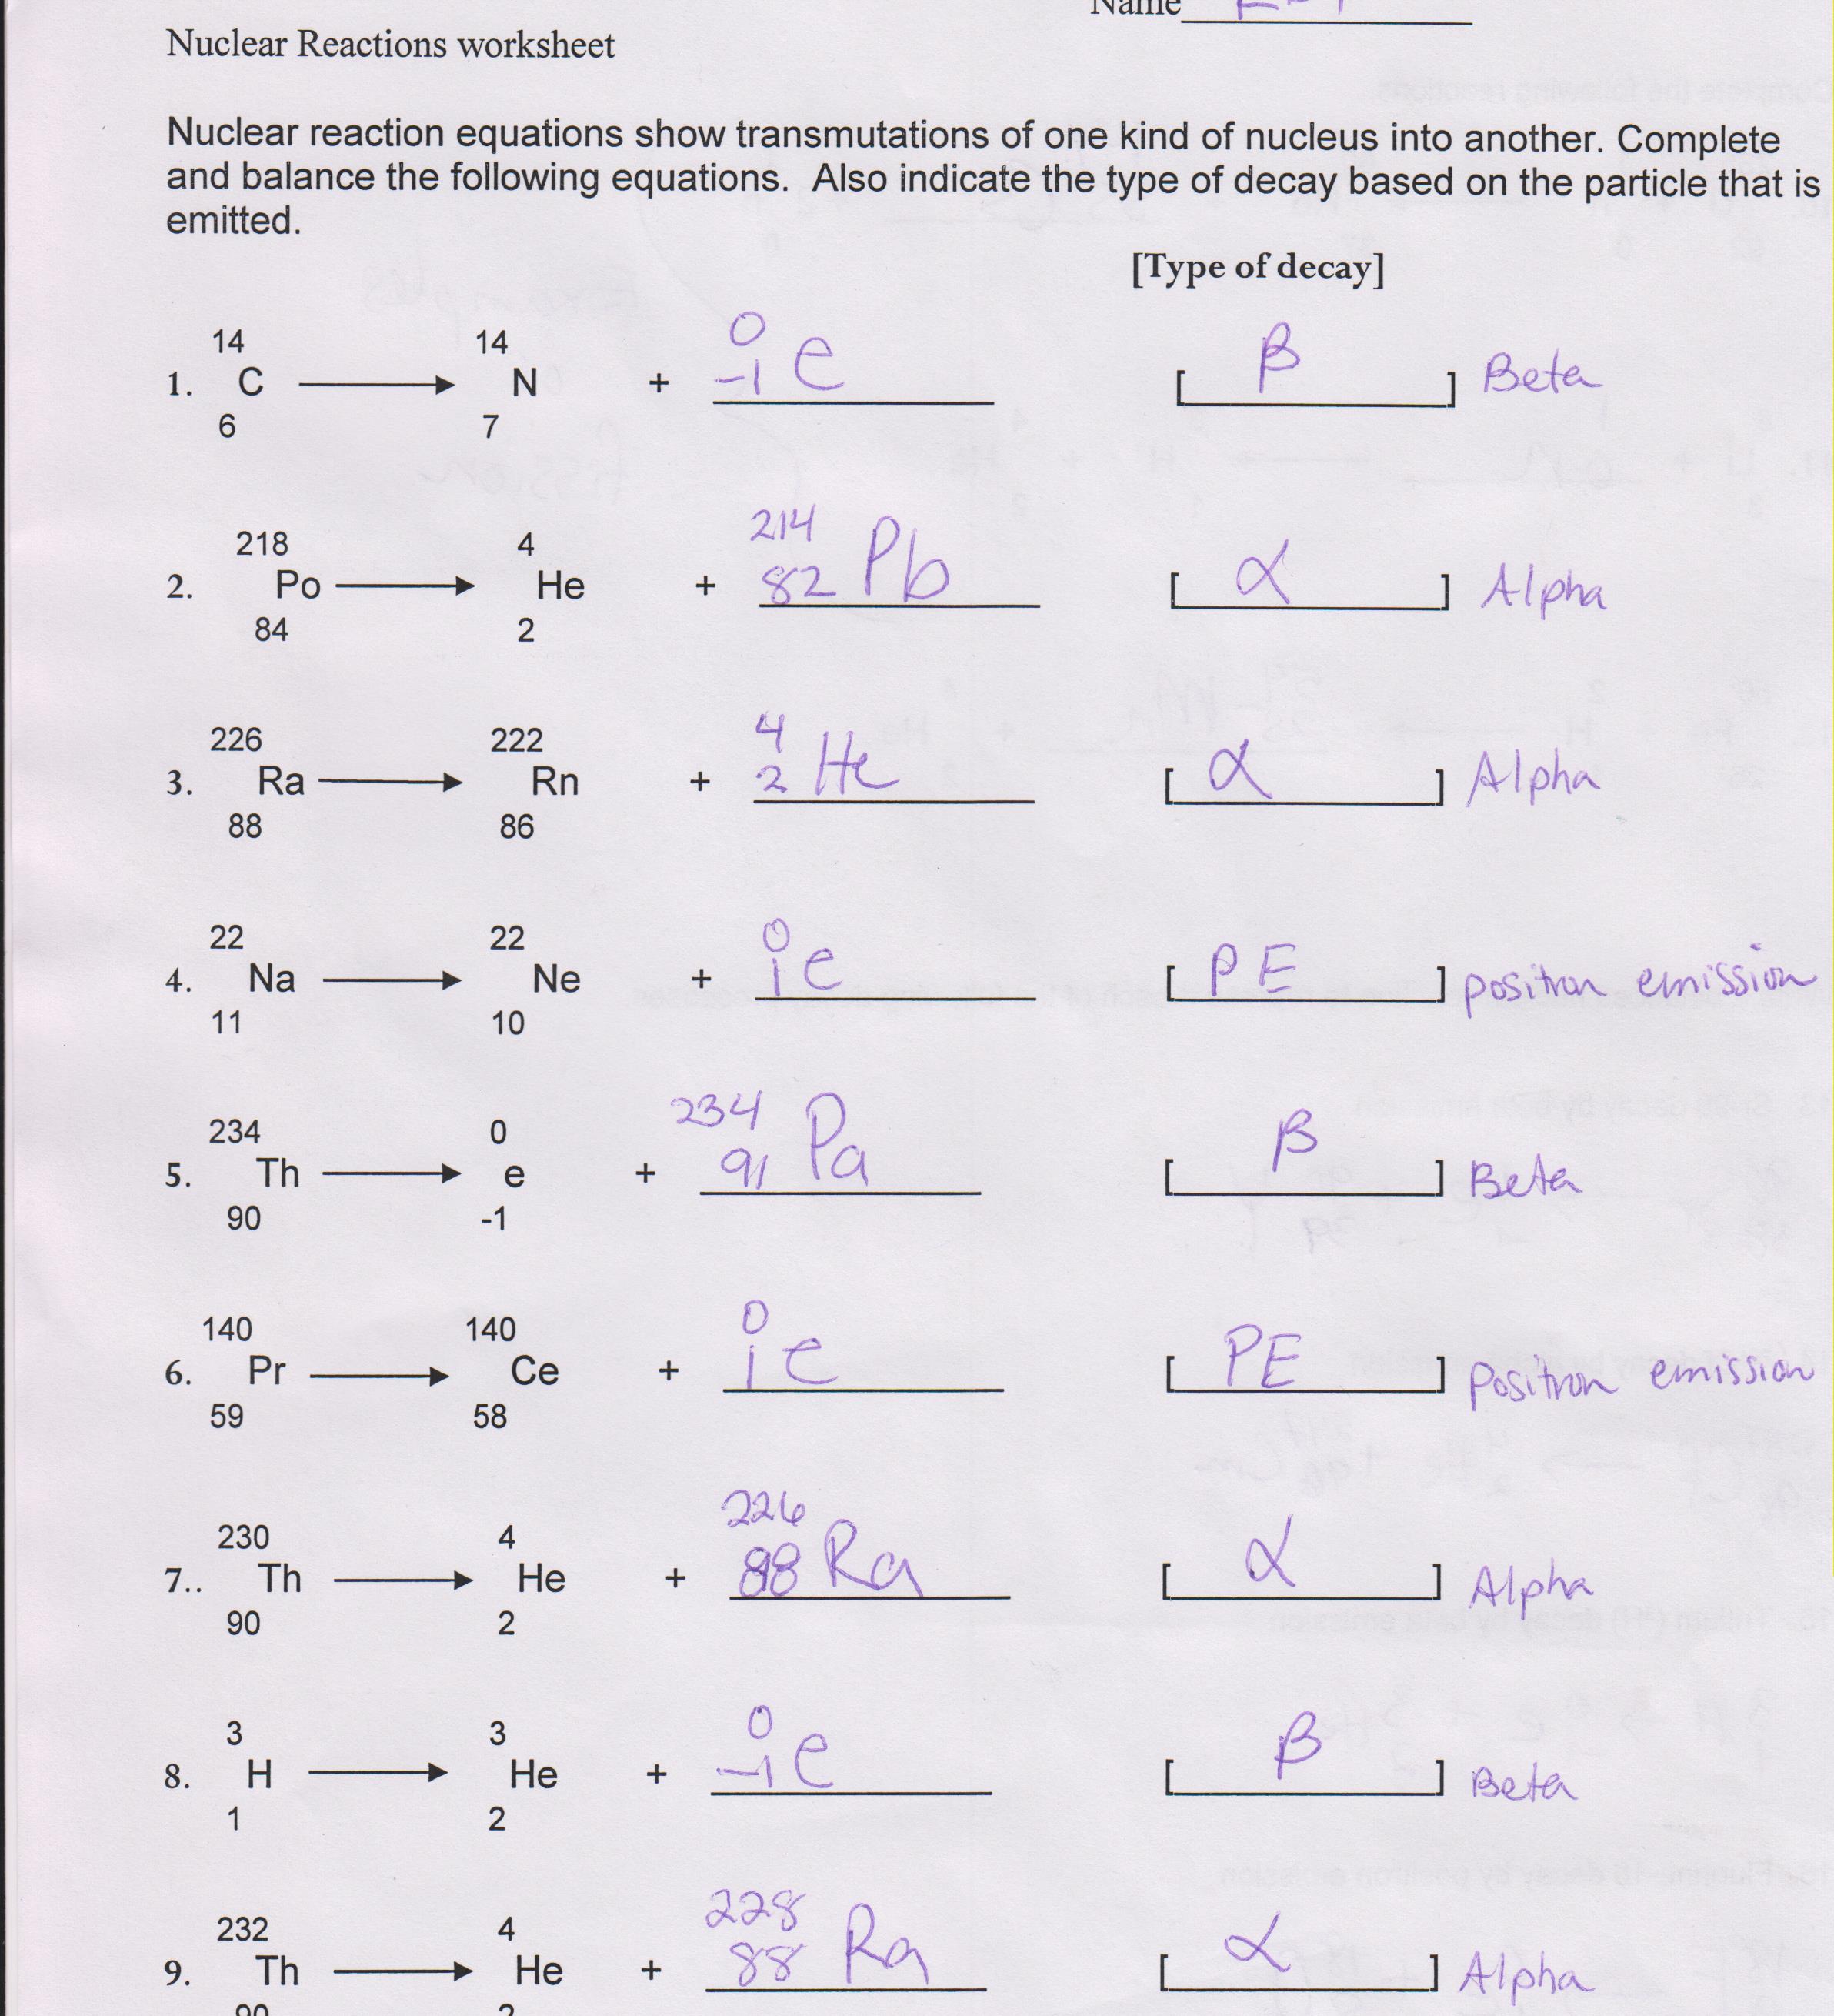 Finishing up Nuclear Equations Regarding Nuclear Decay Worksheet Answer Key